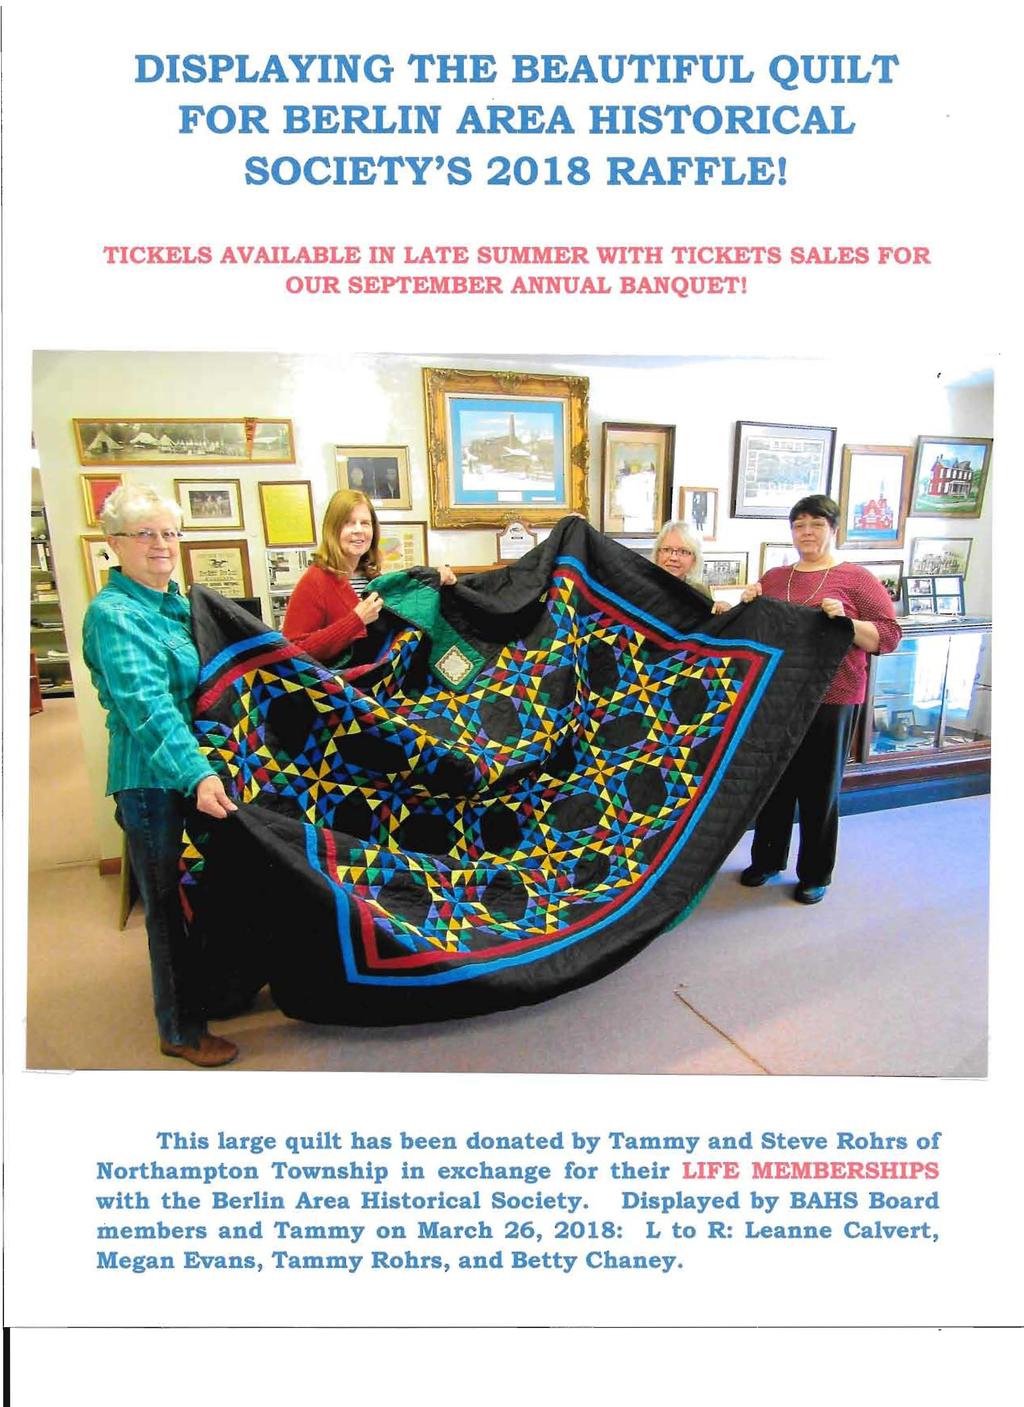 DISPLAY NG THE BEAUTIFUL QUILT FOR BERLIN AREA HISTORICAL SOCIETY'S 2018 RAFFLE! TICKELS AVAILABLE IN LATE SUMMER WITH TICKETS SALES FOR OUR SEPTEMBER ANNUAL BANQUET!